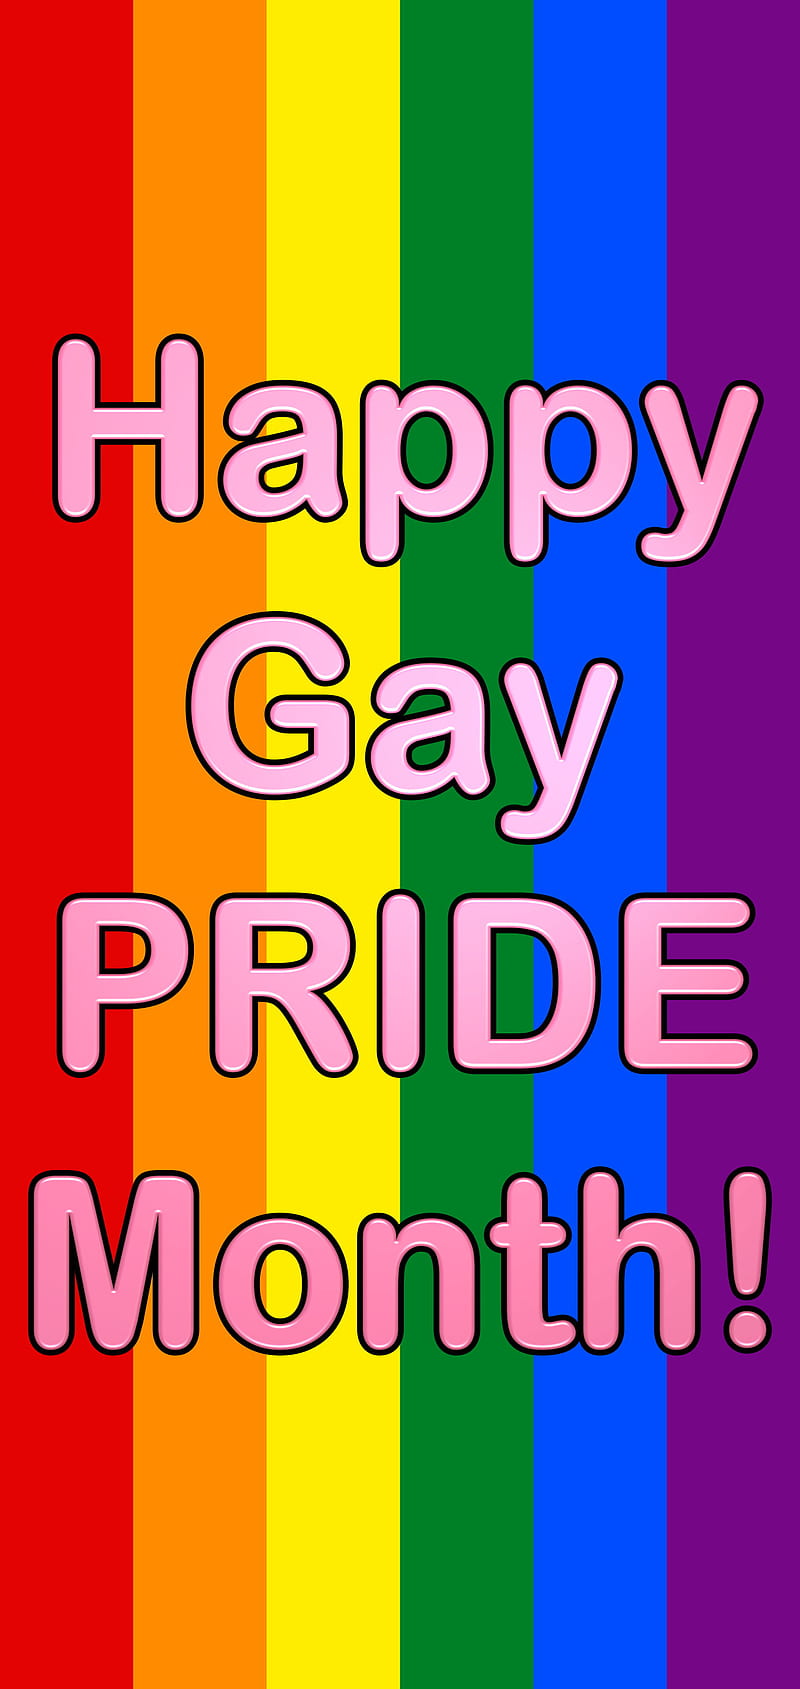 happy gay pride month images